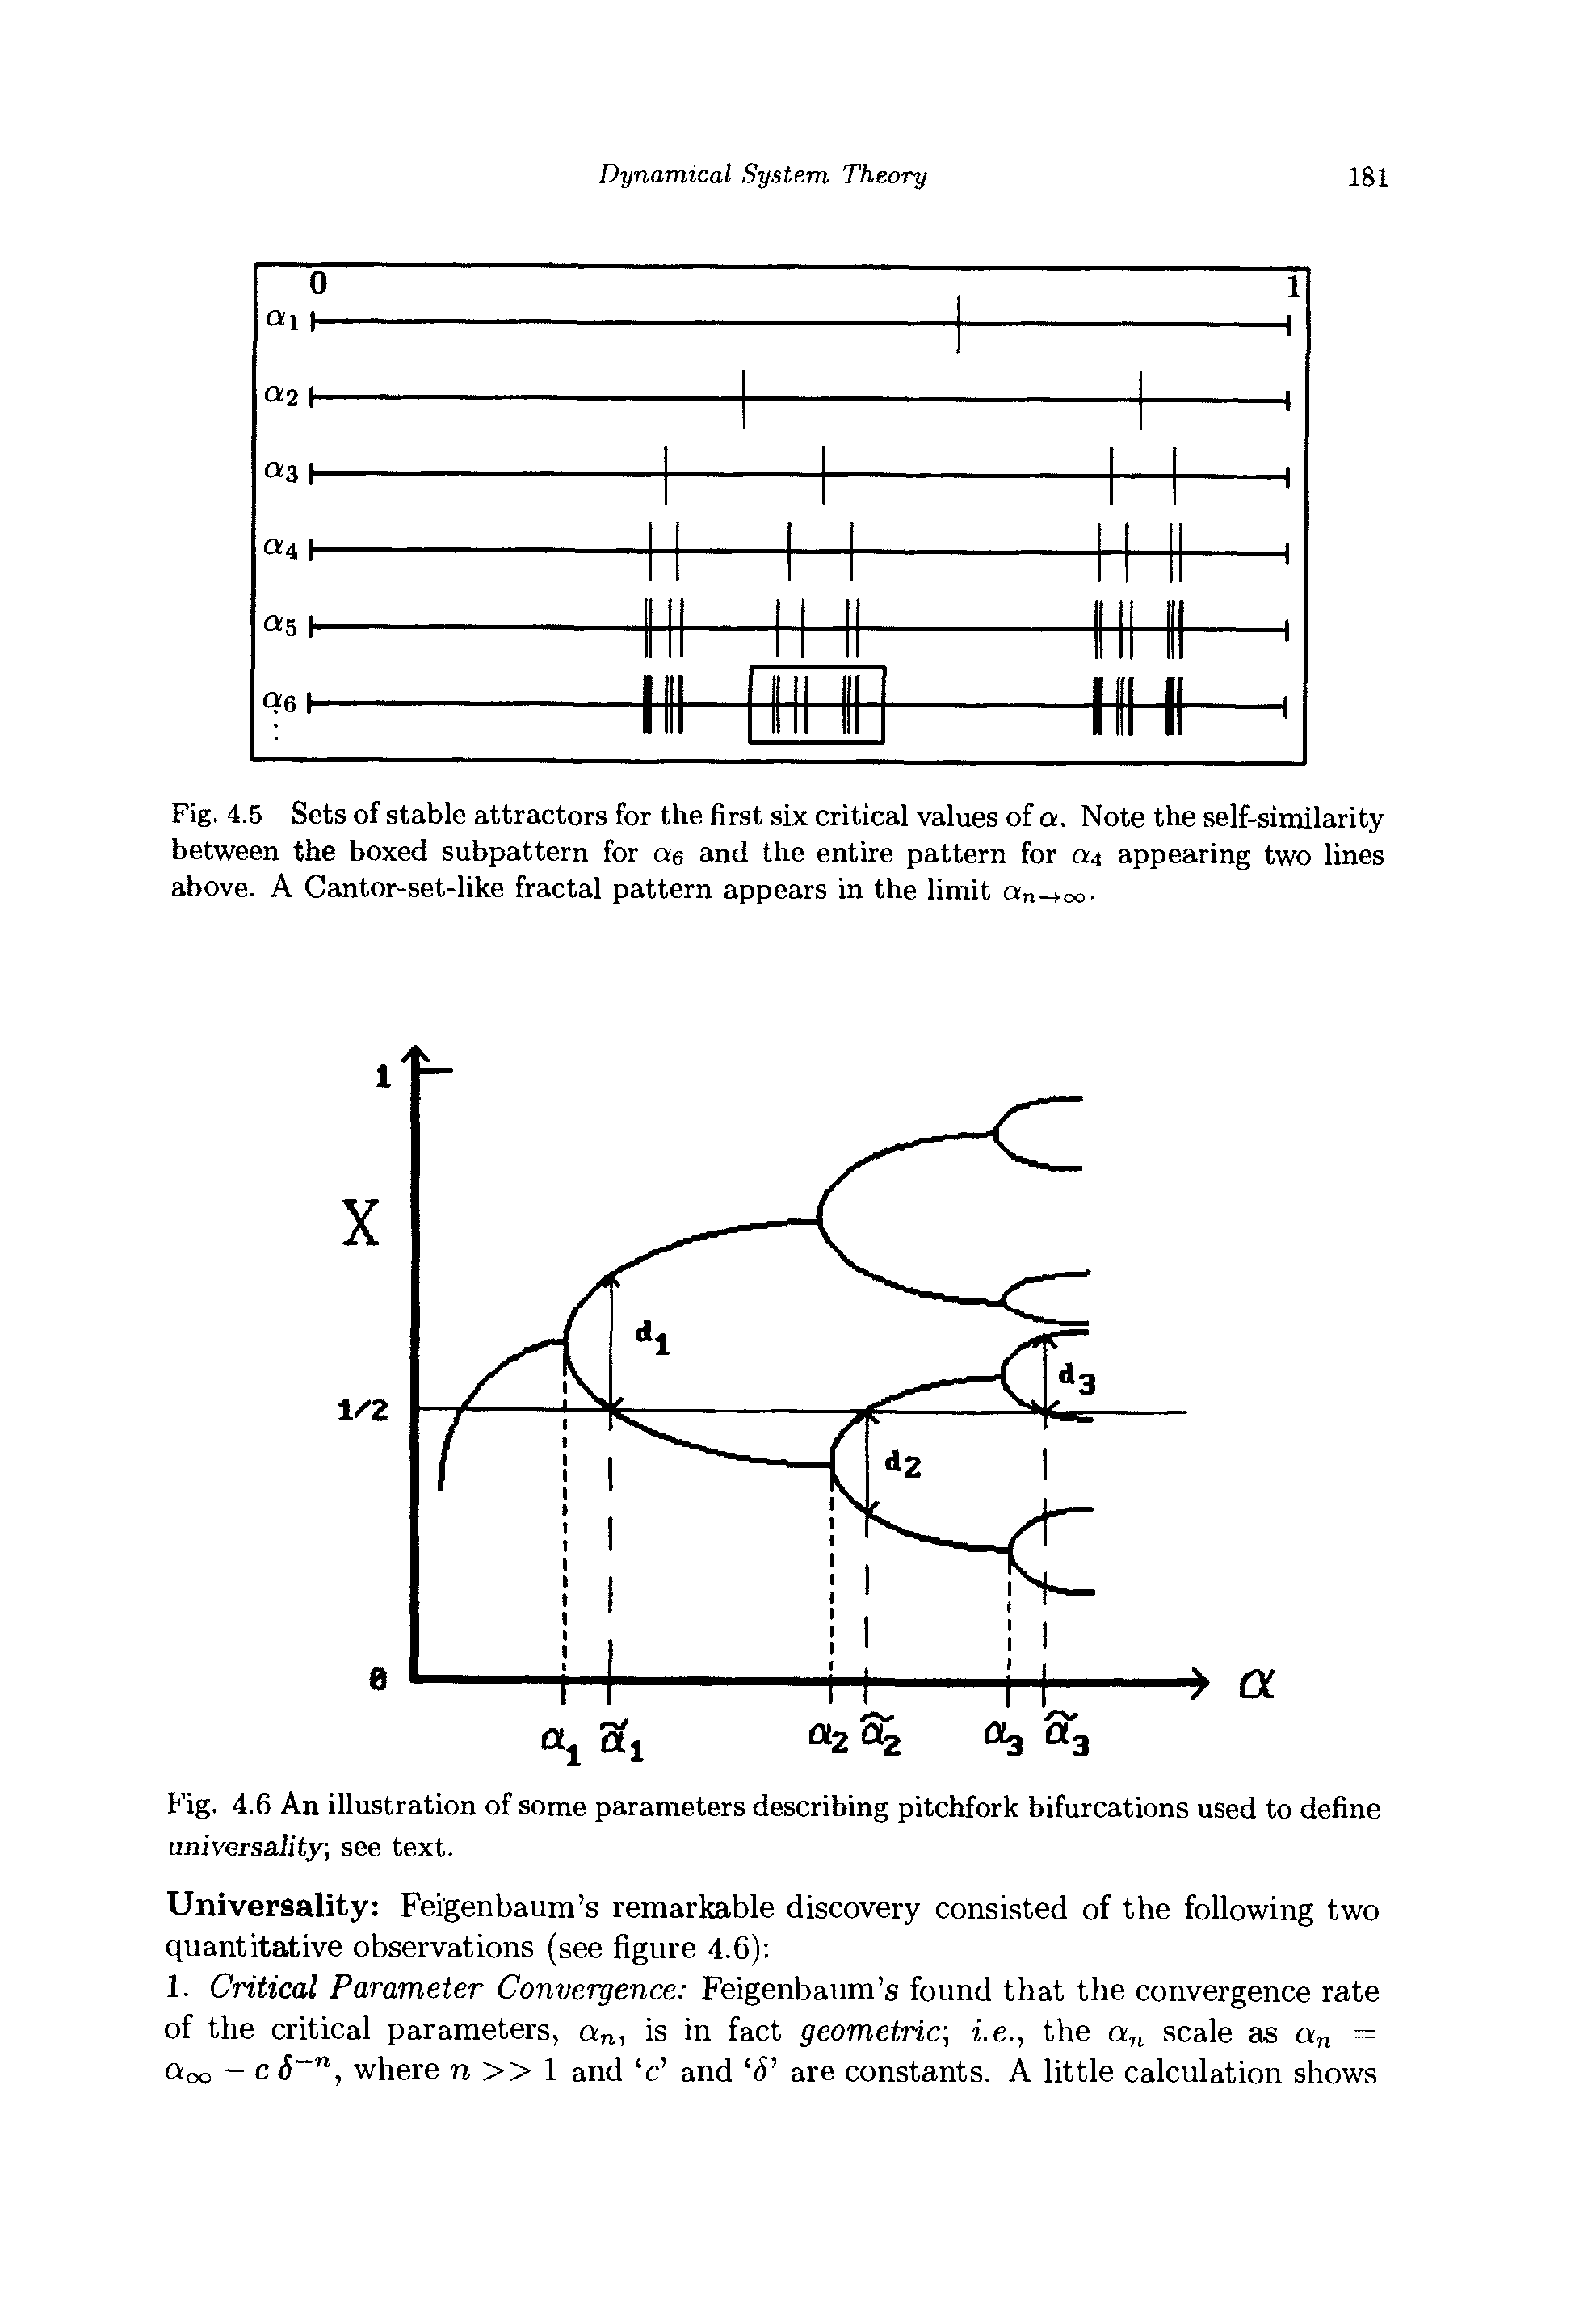 Fig. 4.6 An illustration of some parameters describing pitchfork bifurcations used to define universaJity see text.